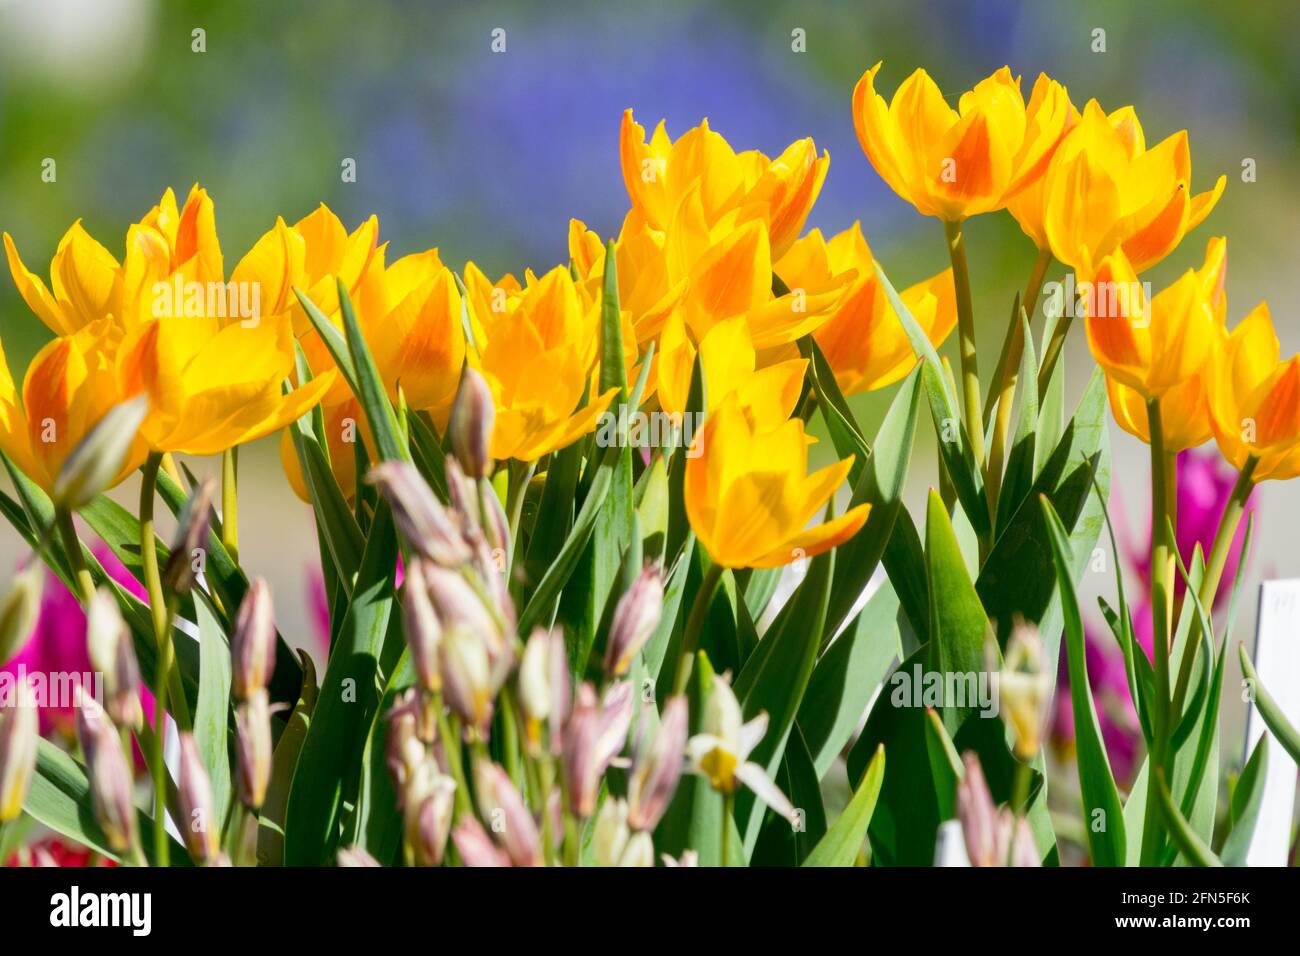 Tulipa heweri Yellow Dwarf Tulips Spring Garden Blooming Plant Flower Yellow Tulips Small Clumps of Species Tulip Group Tiny Flowers Flowering May Stock Photo